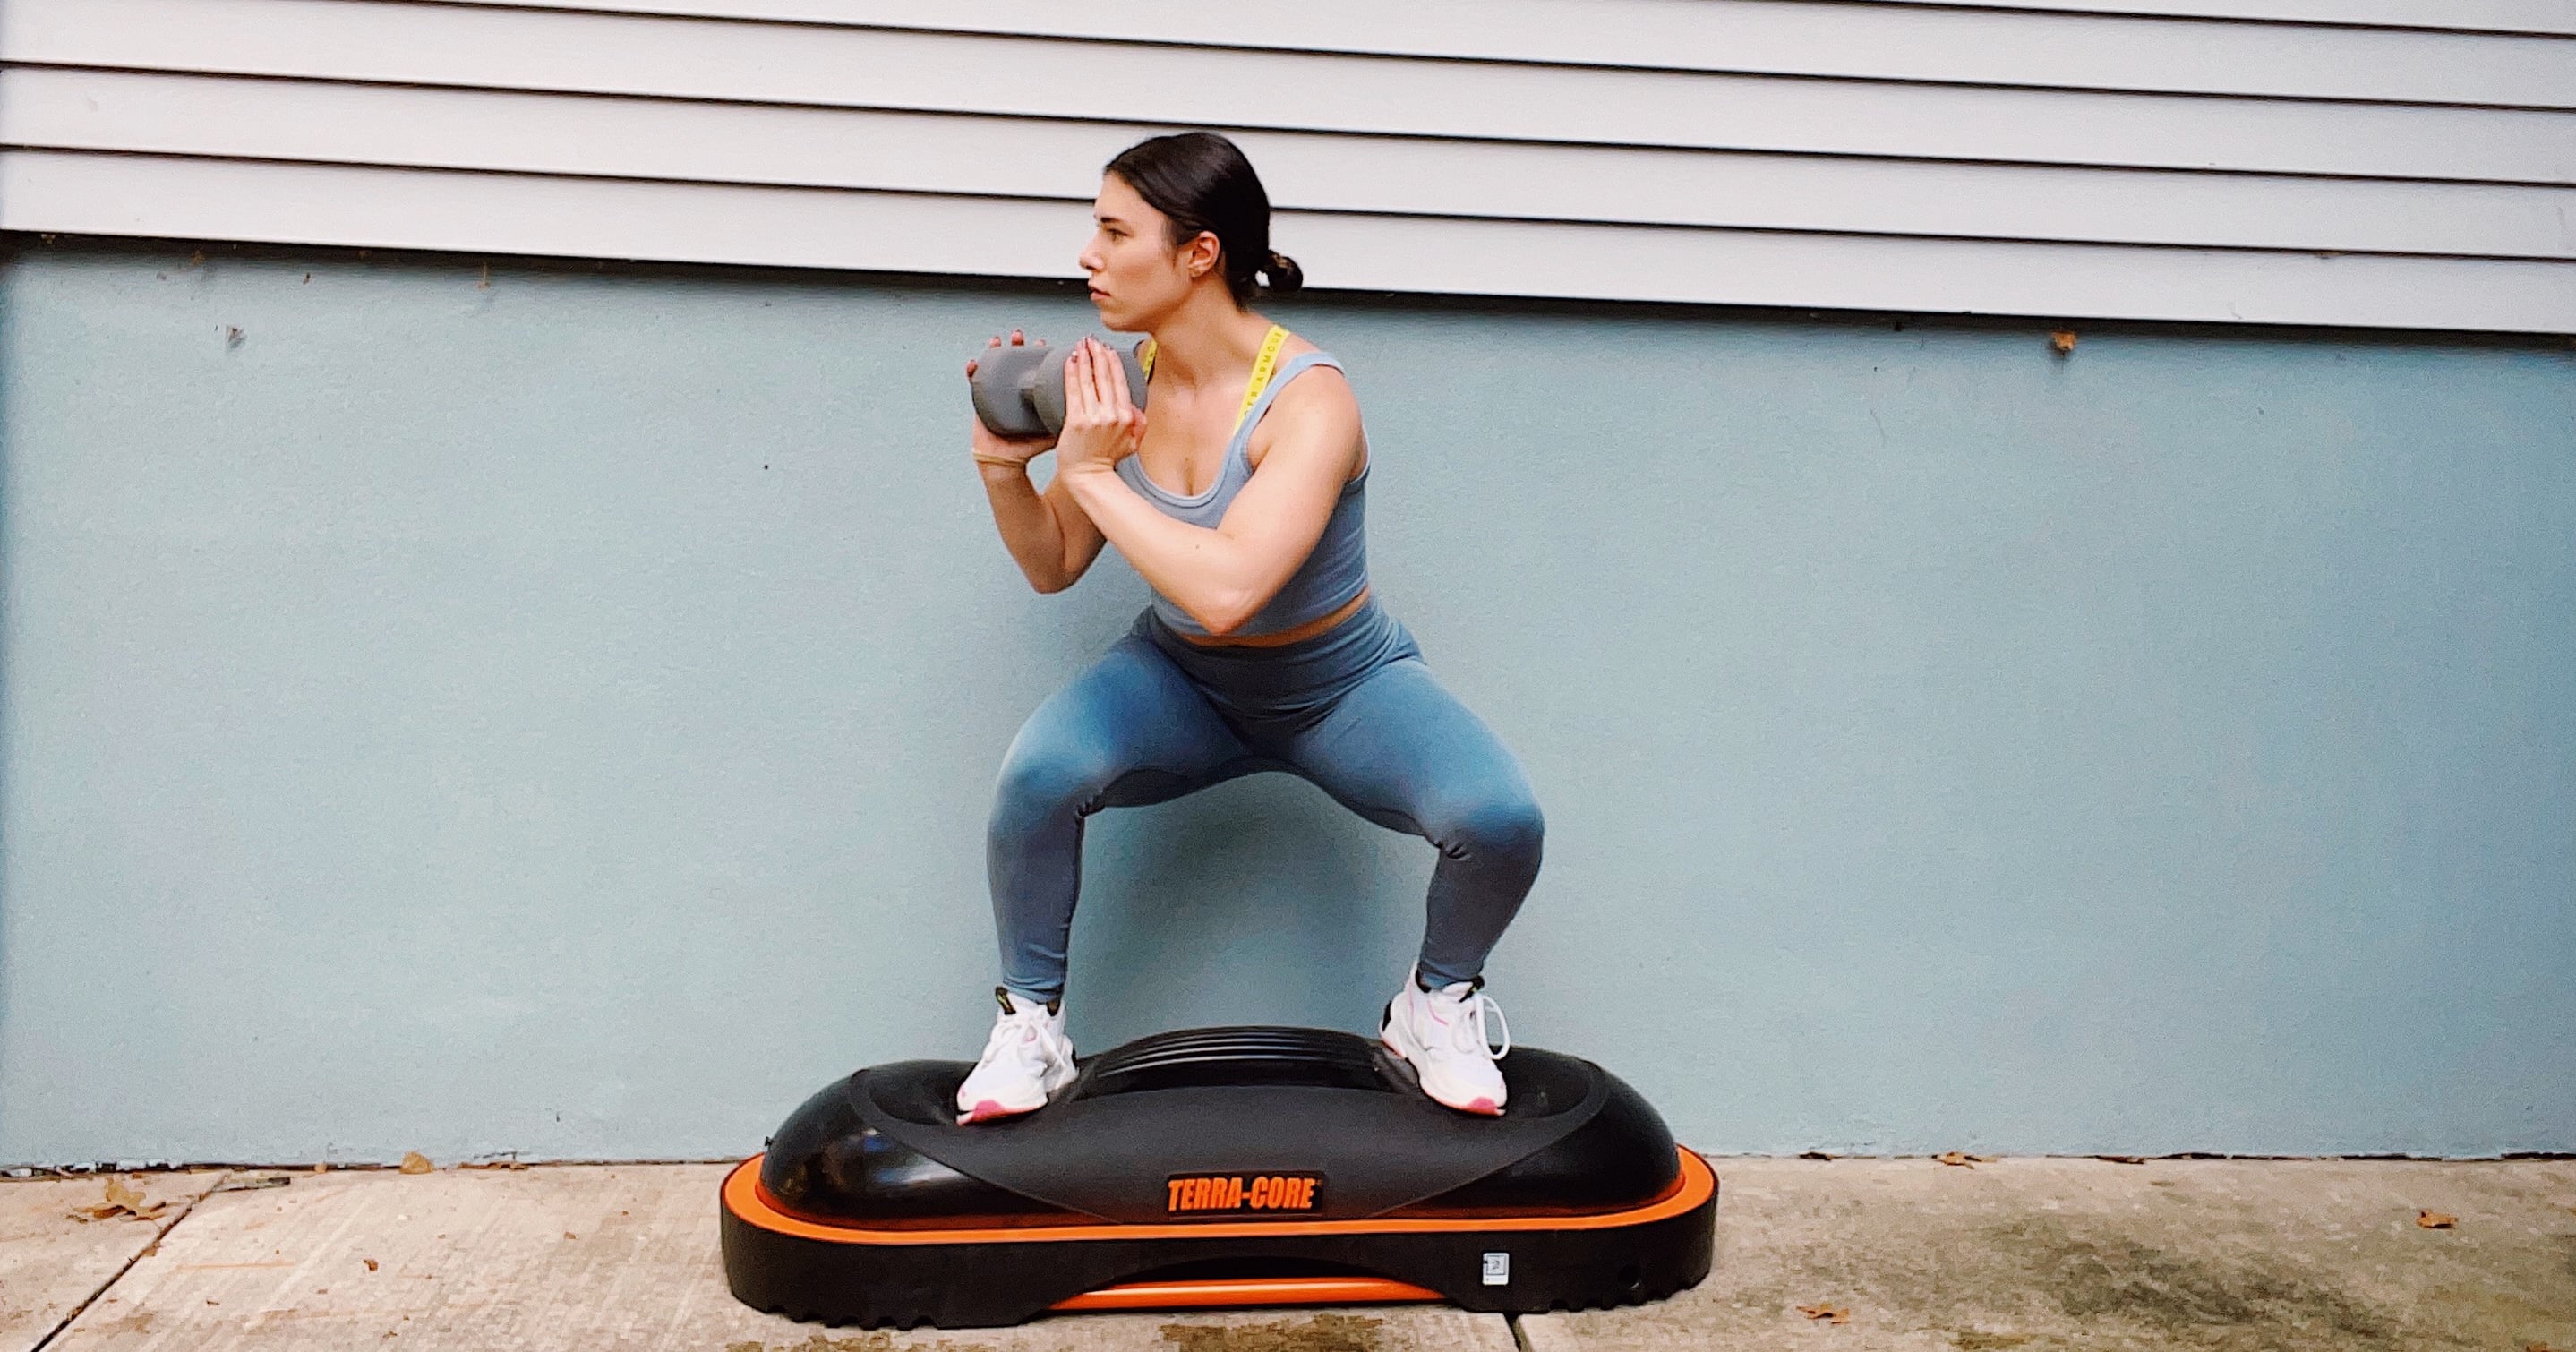 Advanced Full-Body Squat Move For Strength and Stability